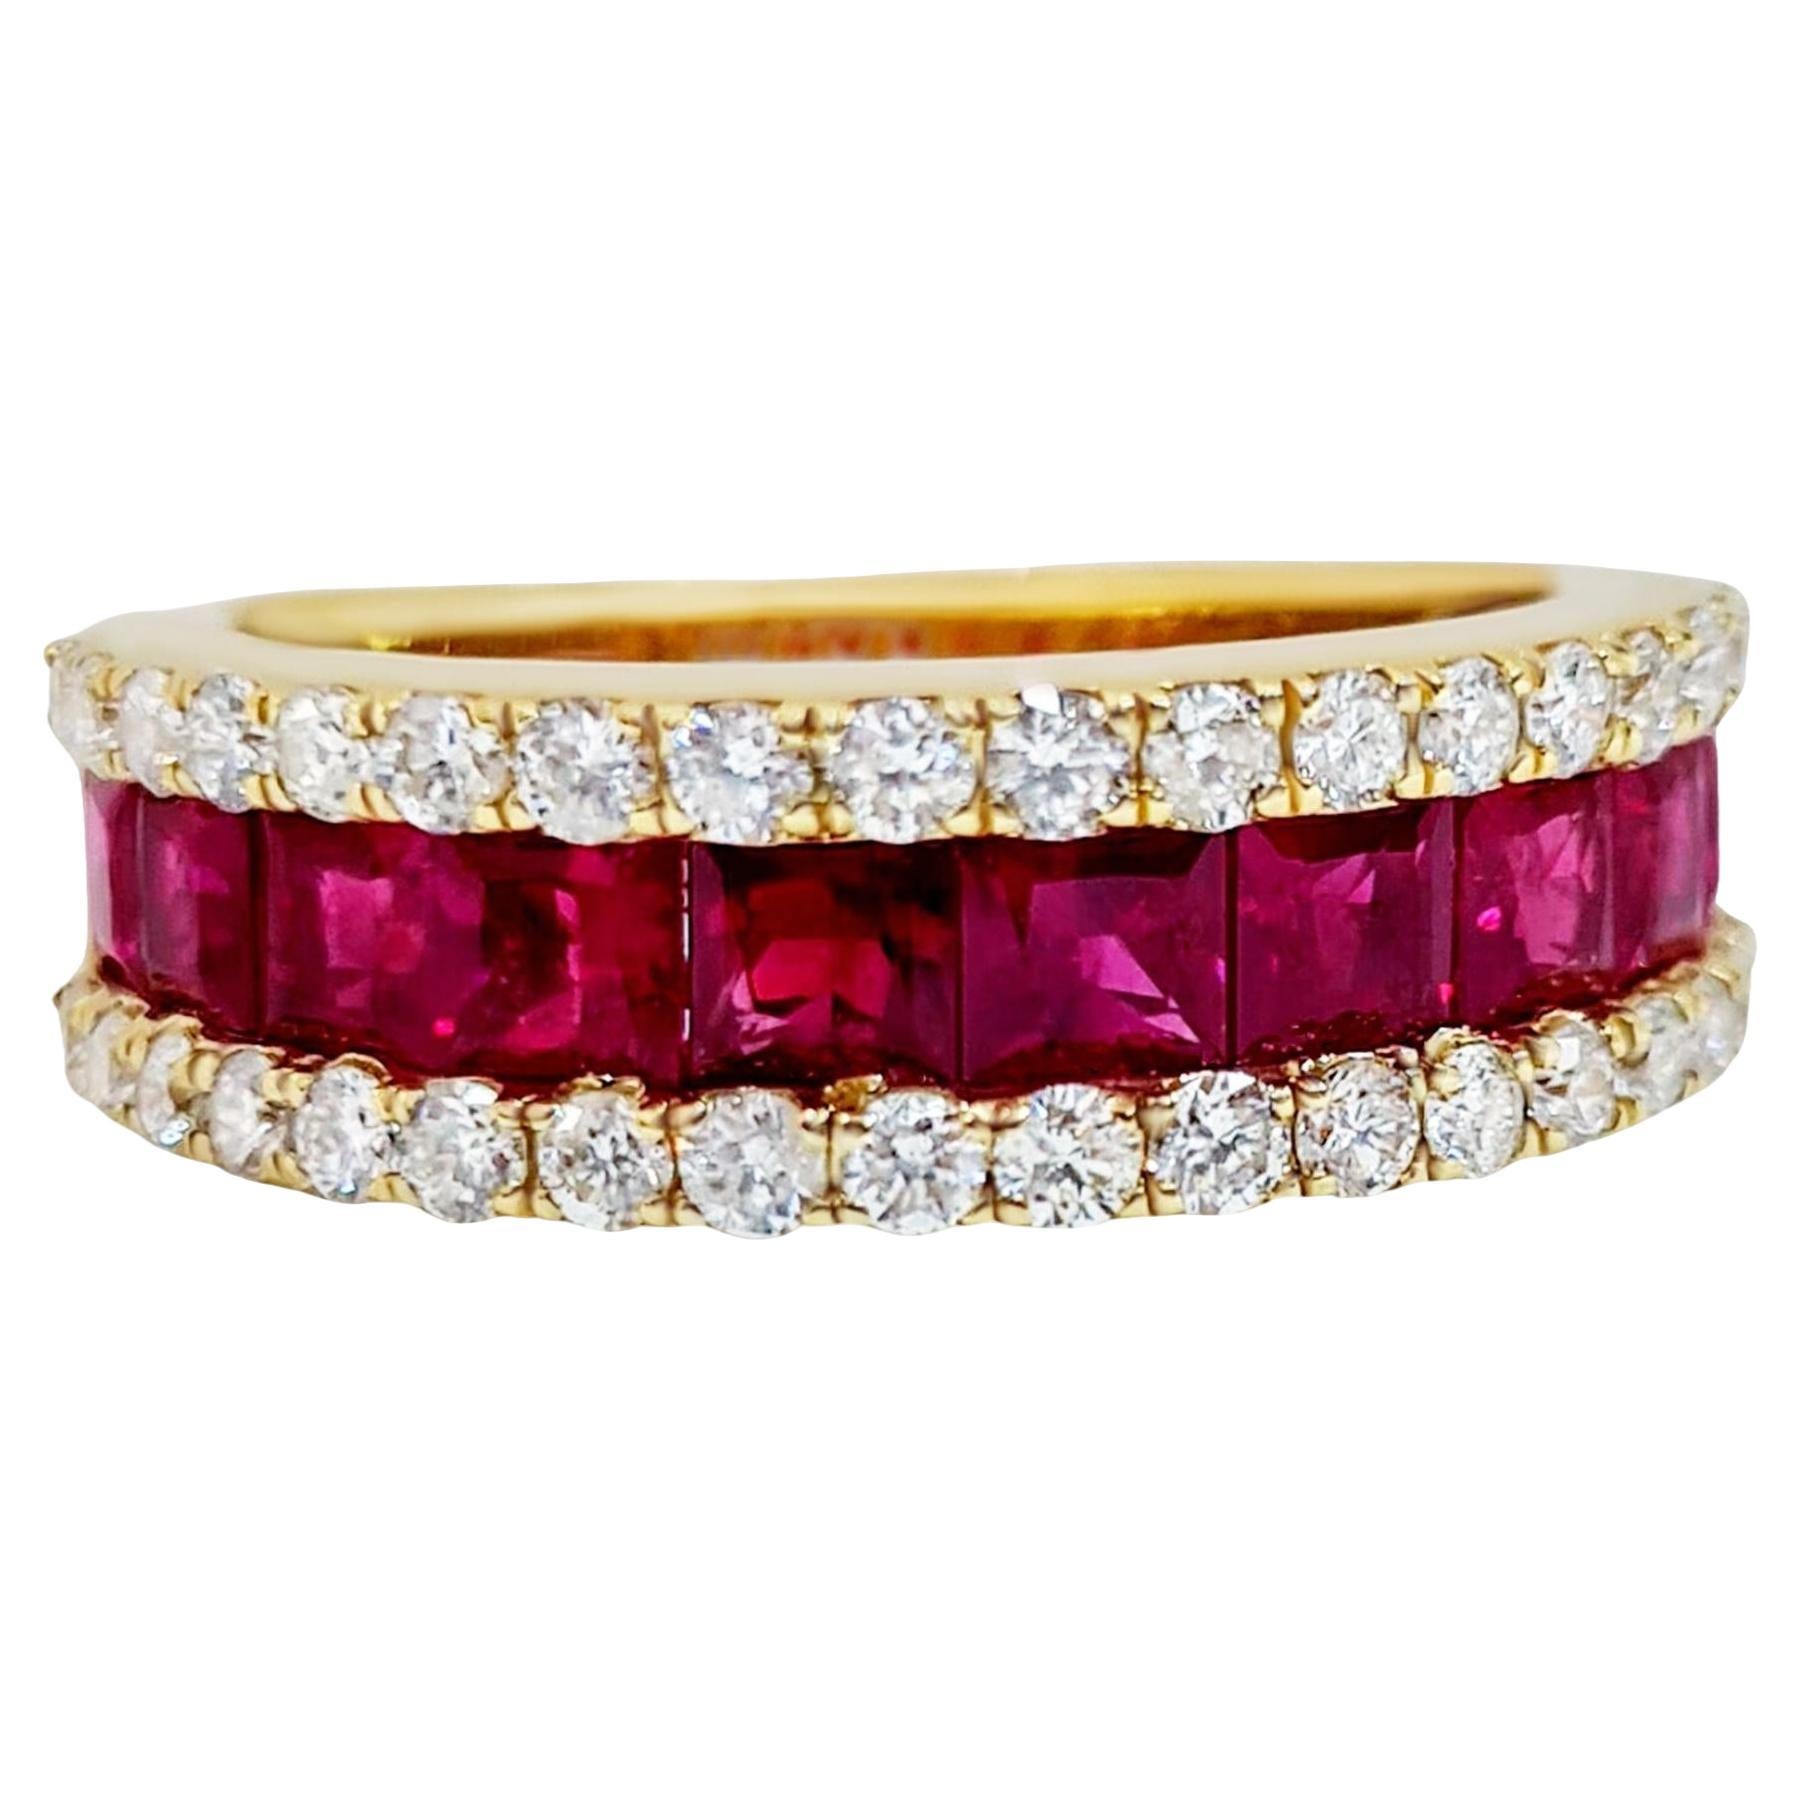 Ruby Band Ring With Diamonds 2.36 Carats 18K Yellow Gold